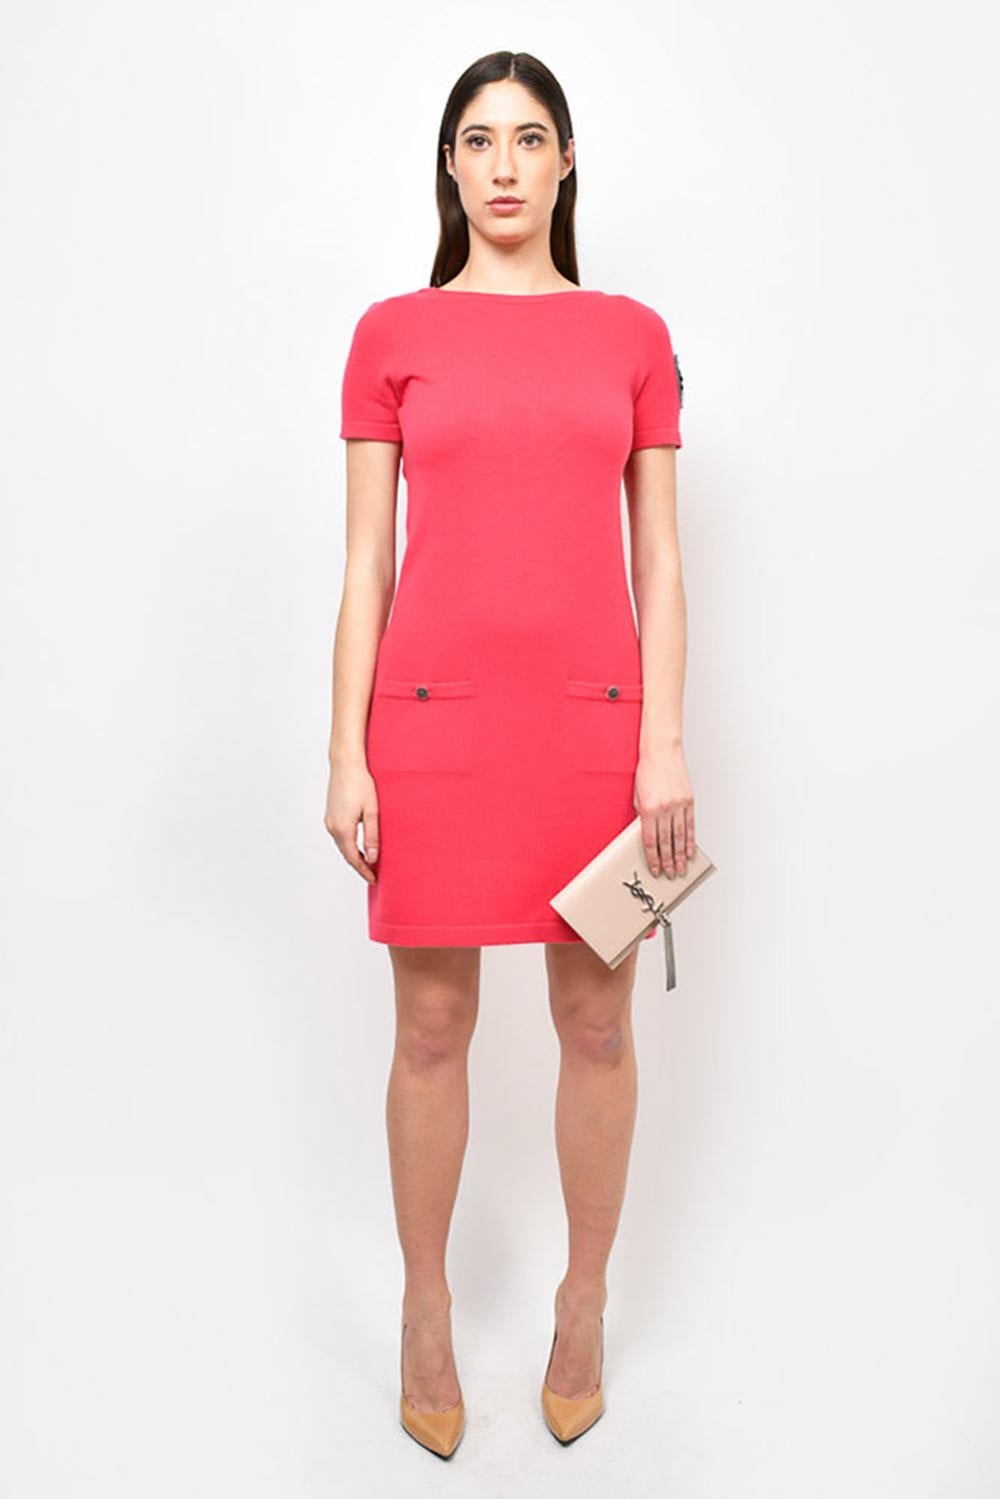 Chanel CC Patch Candy Pink Cashmere Dress For Sale 1